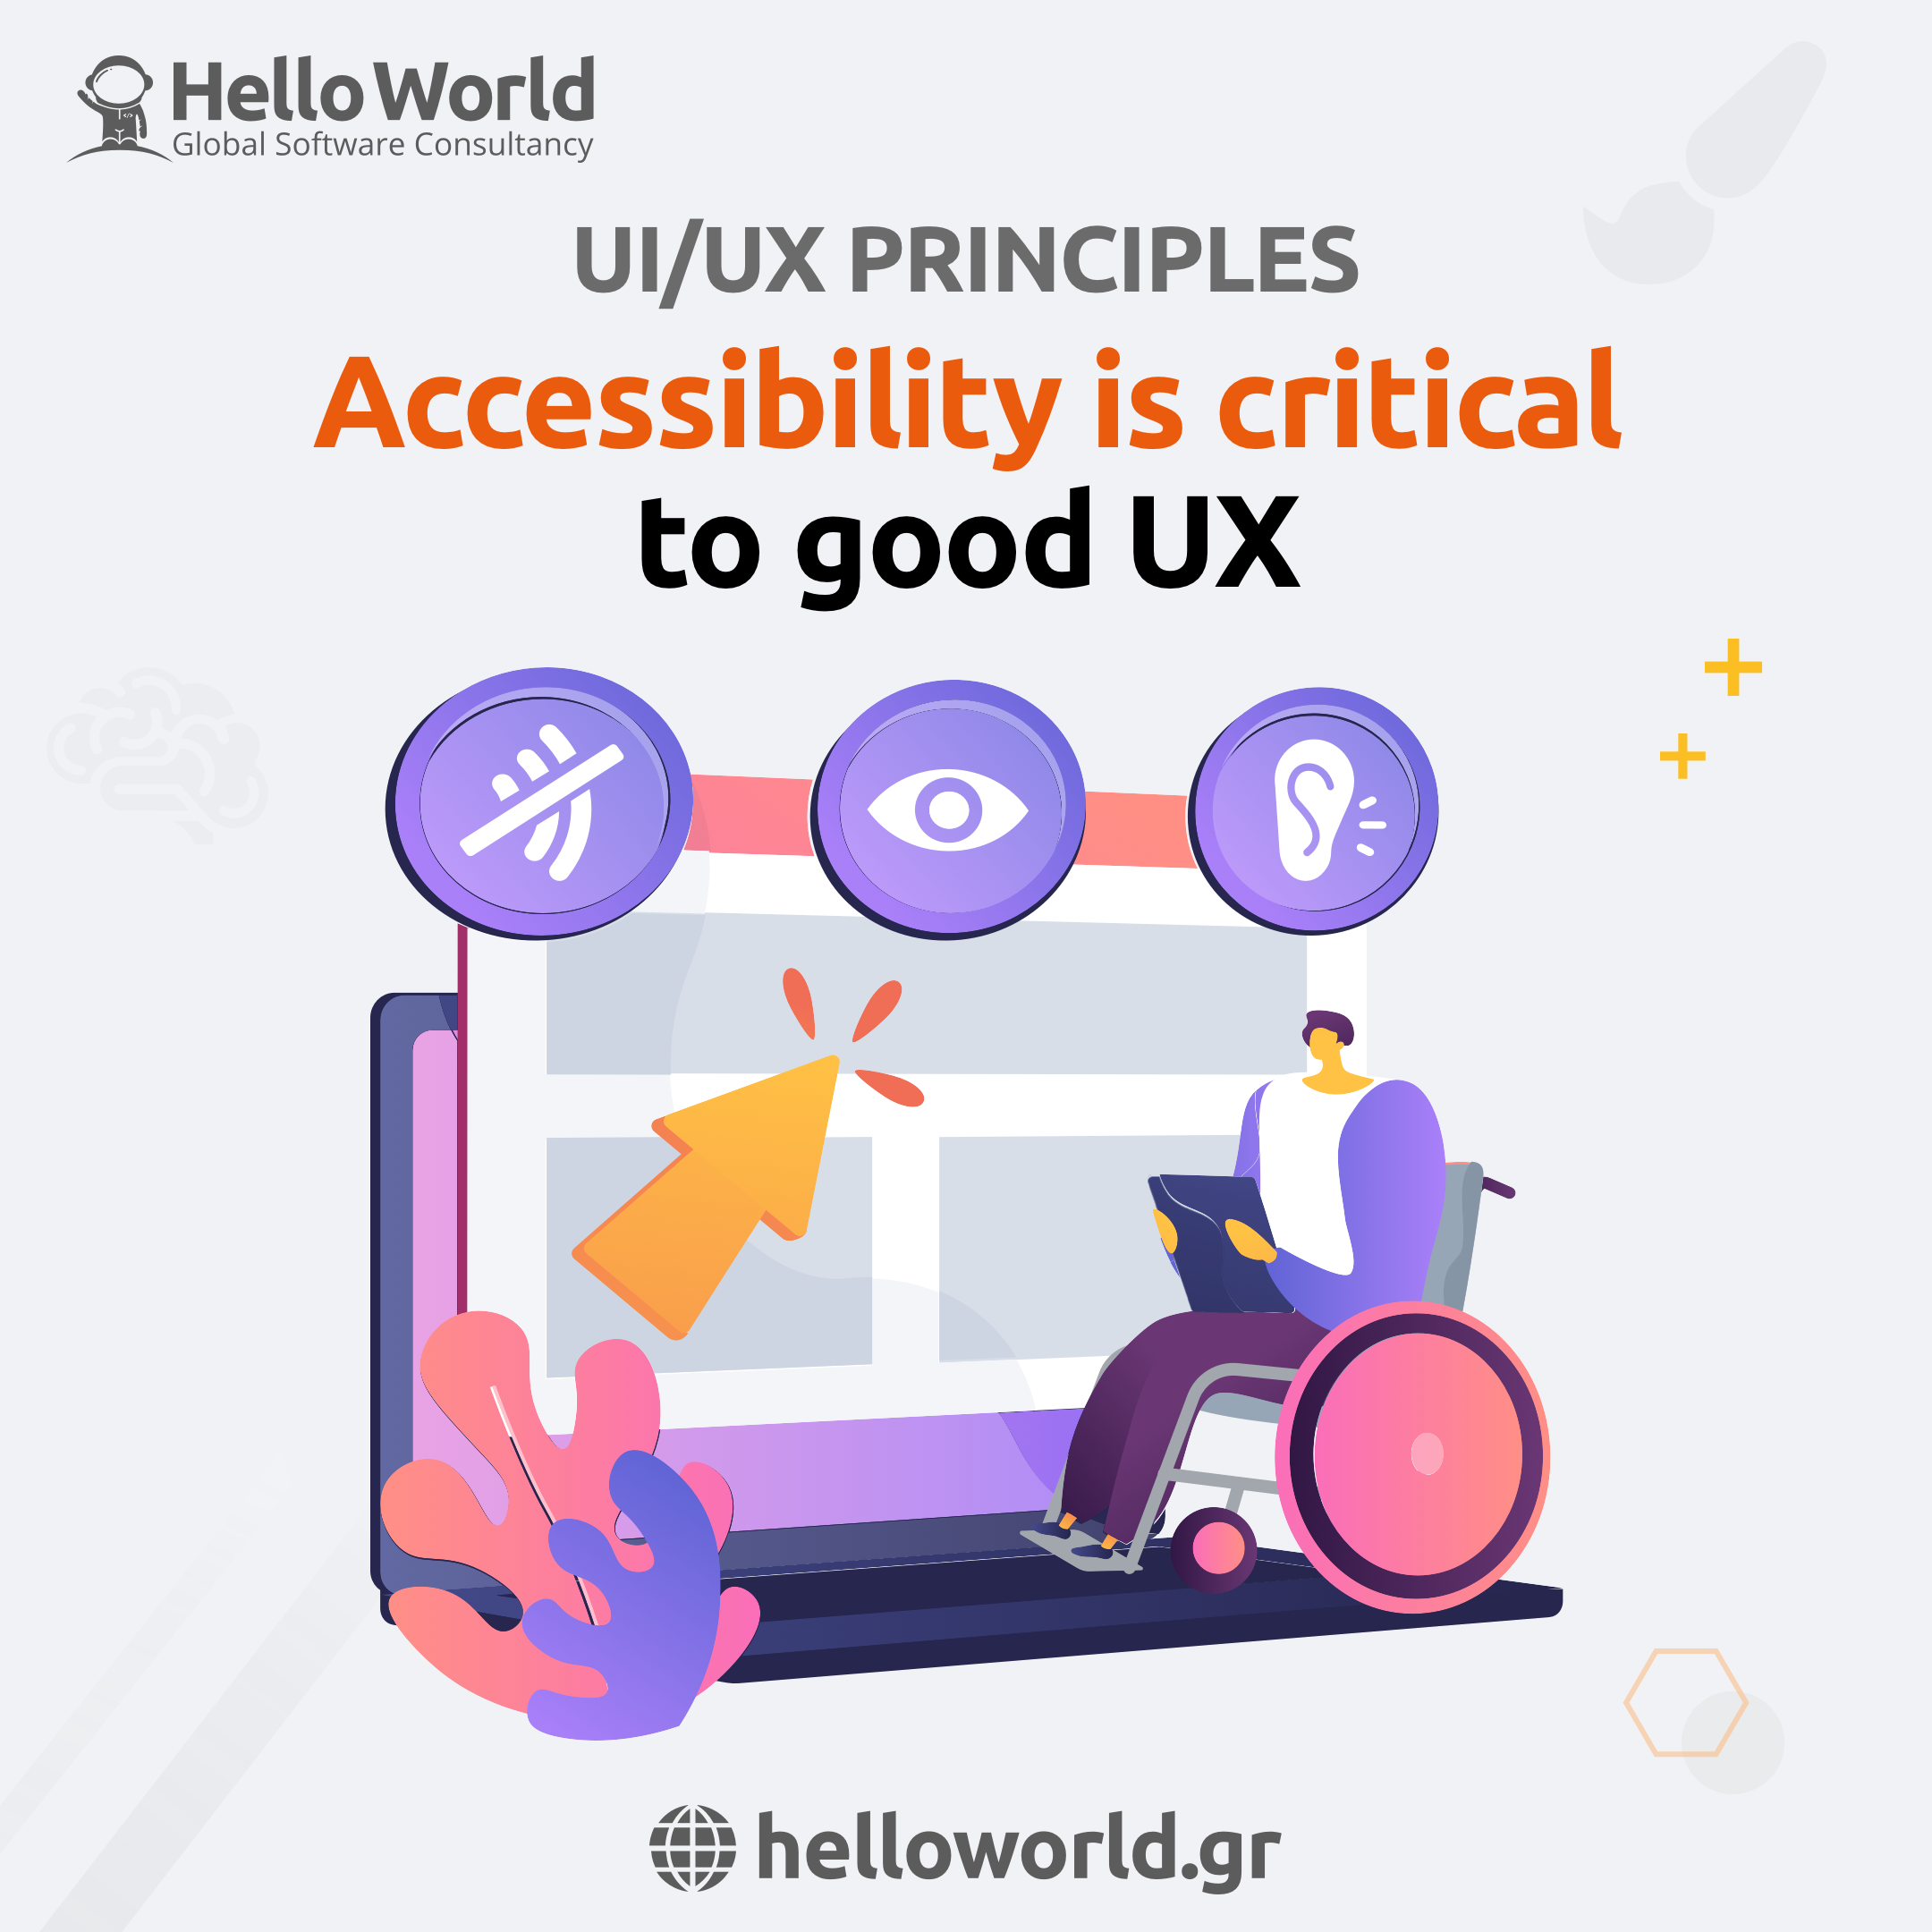 Accessibility is critical to good UX